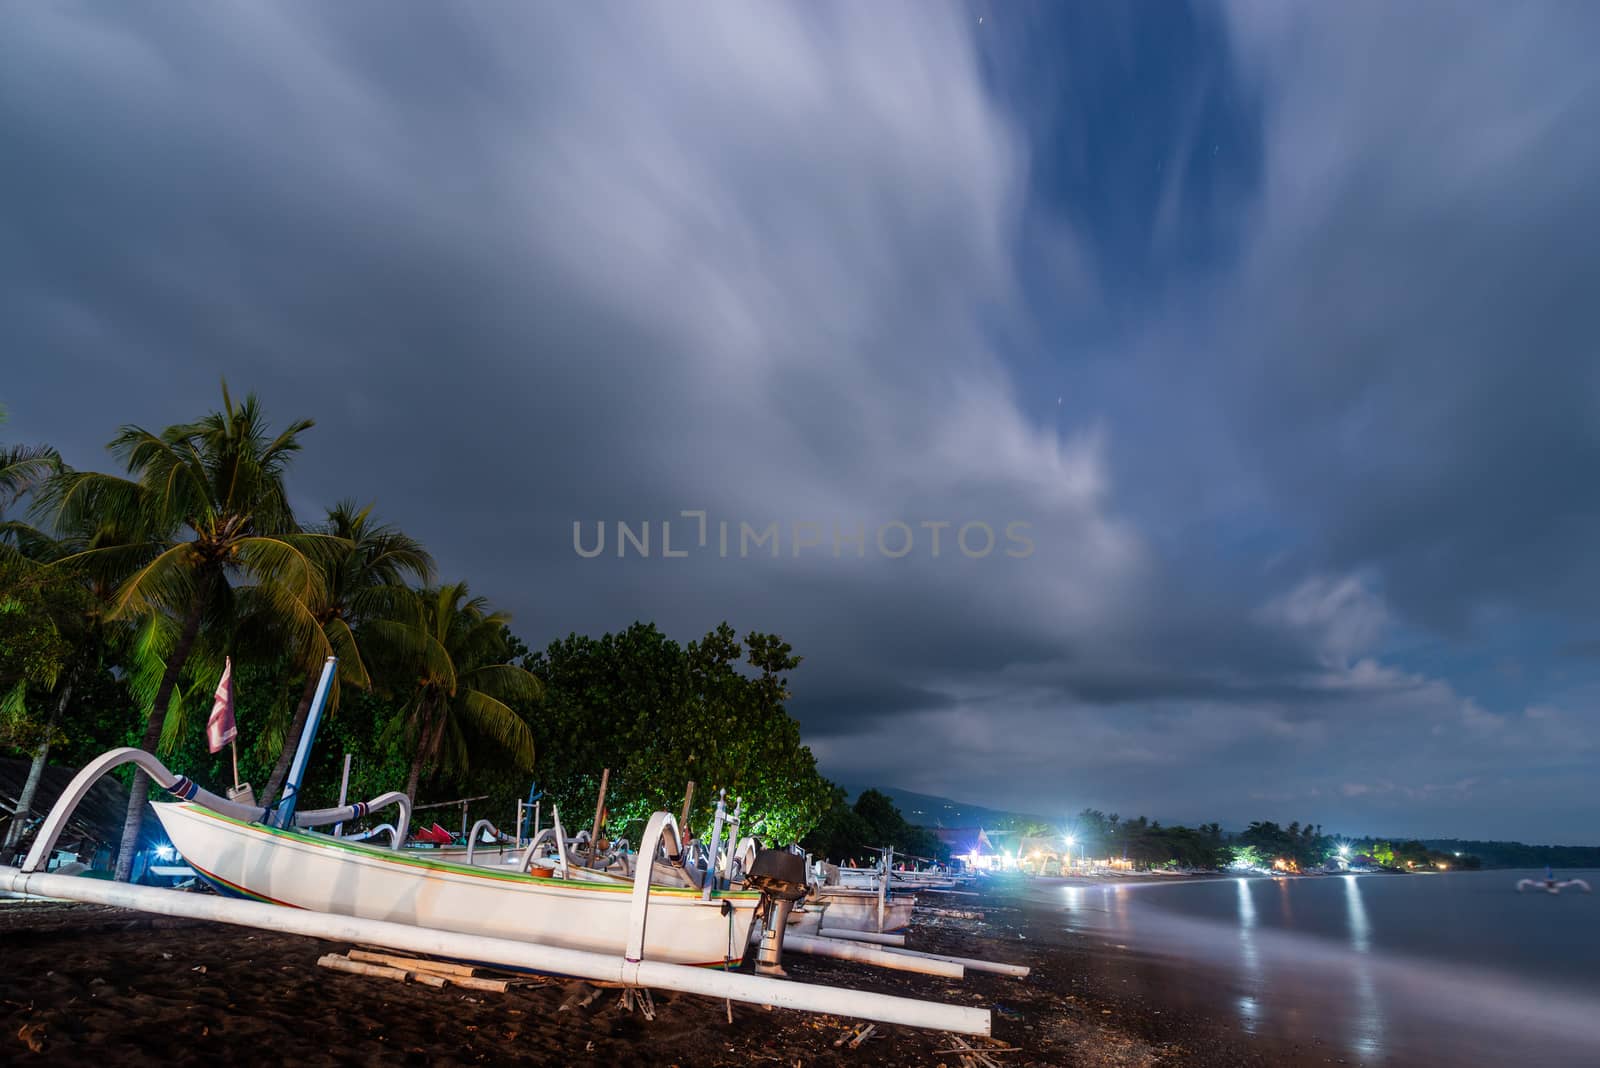 Traditional fishing boats on Amed beach at night in Bali, Indonesia. Long exposure photography resulting in motion blur in the clouds, the sea and the trees.